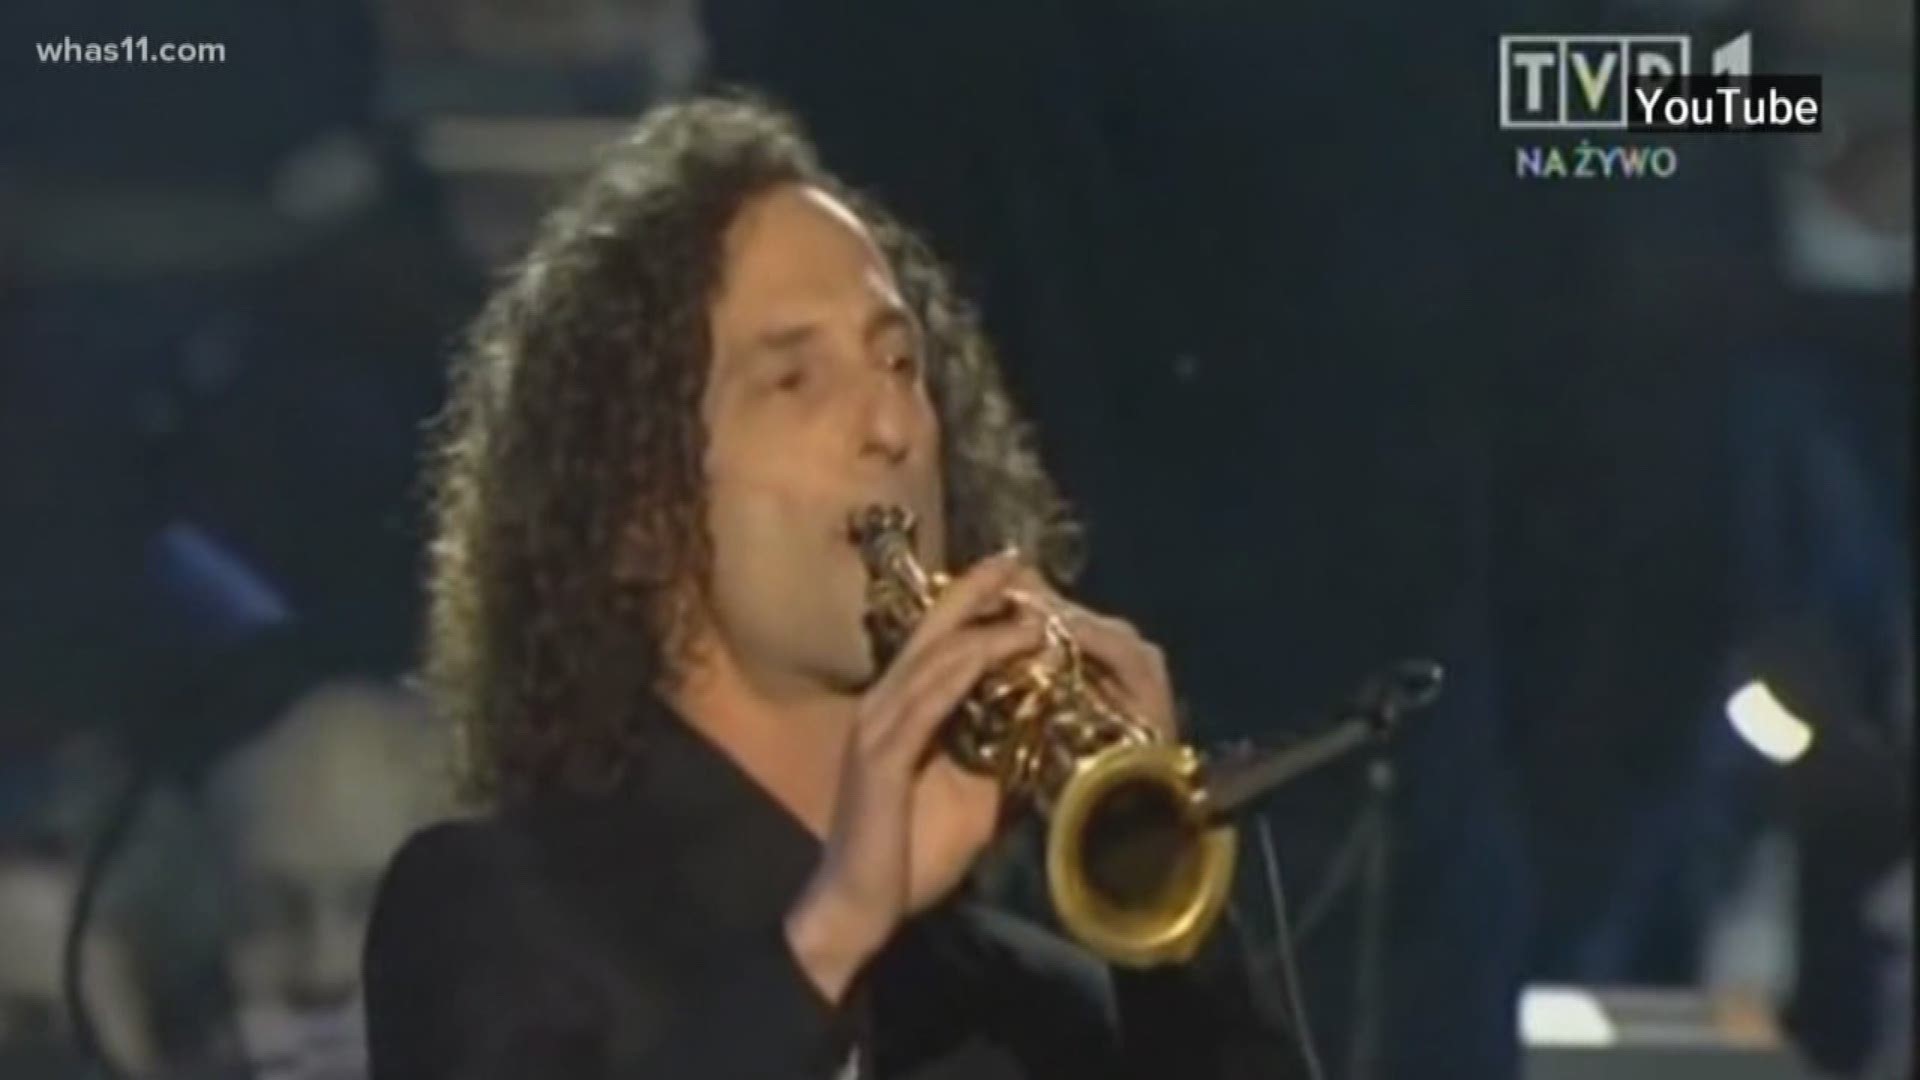 Kenny G announced he will be performing at the Louisville Palace Thursday, June 20. Tickets start at $59.